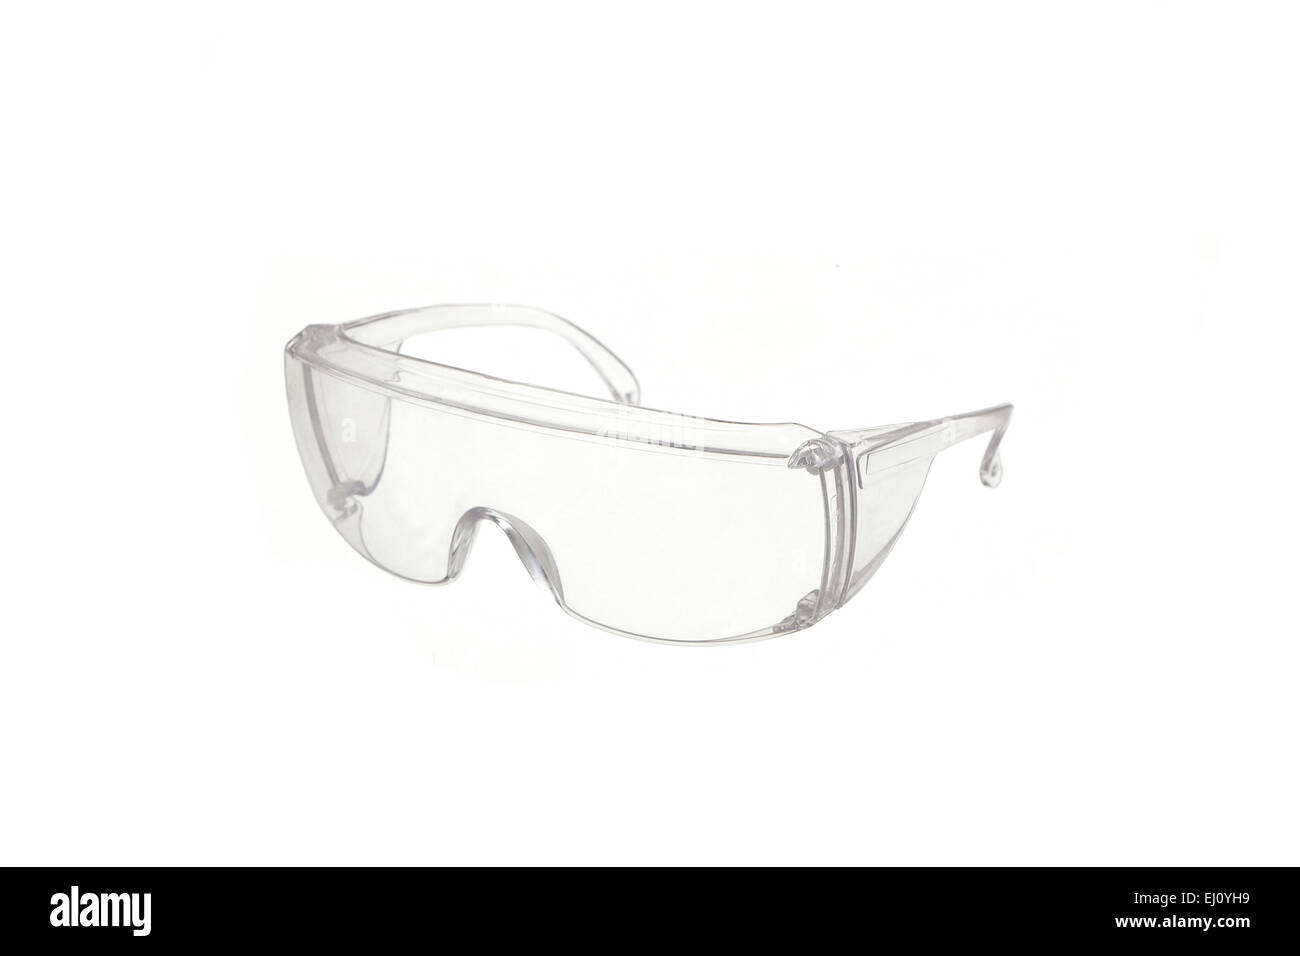 safety glasses isolated on white Stock Photo